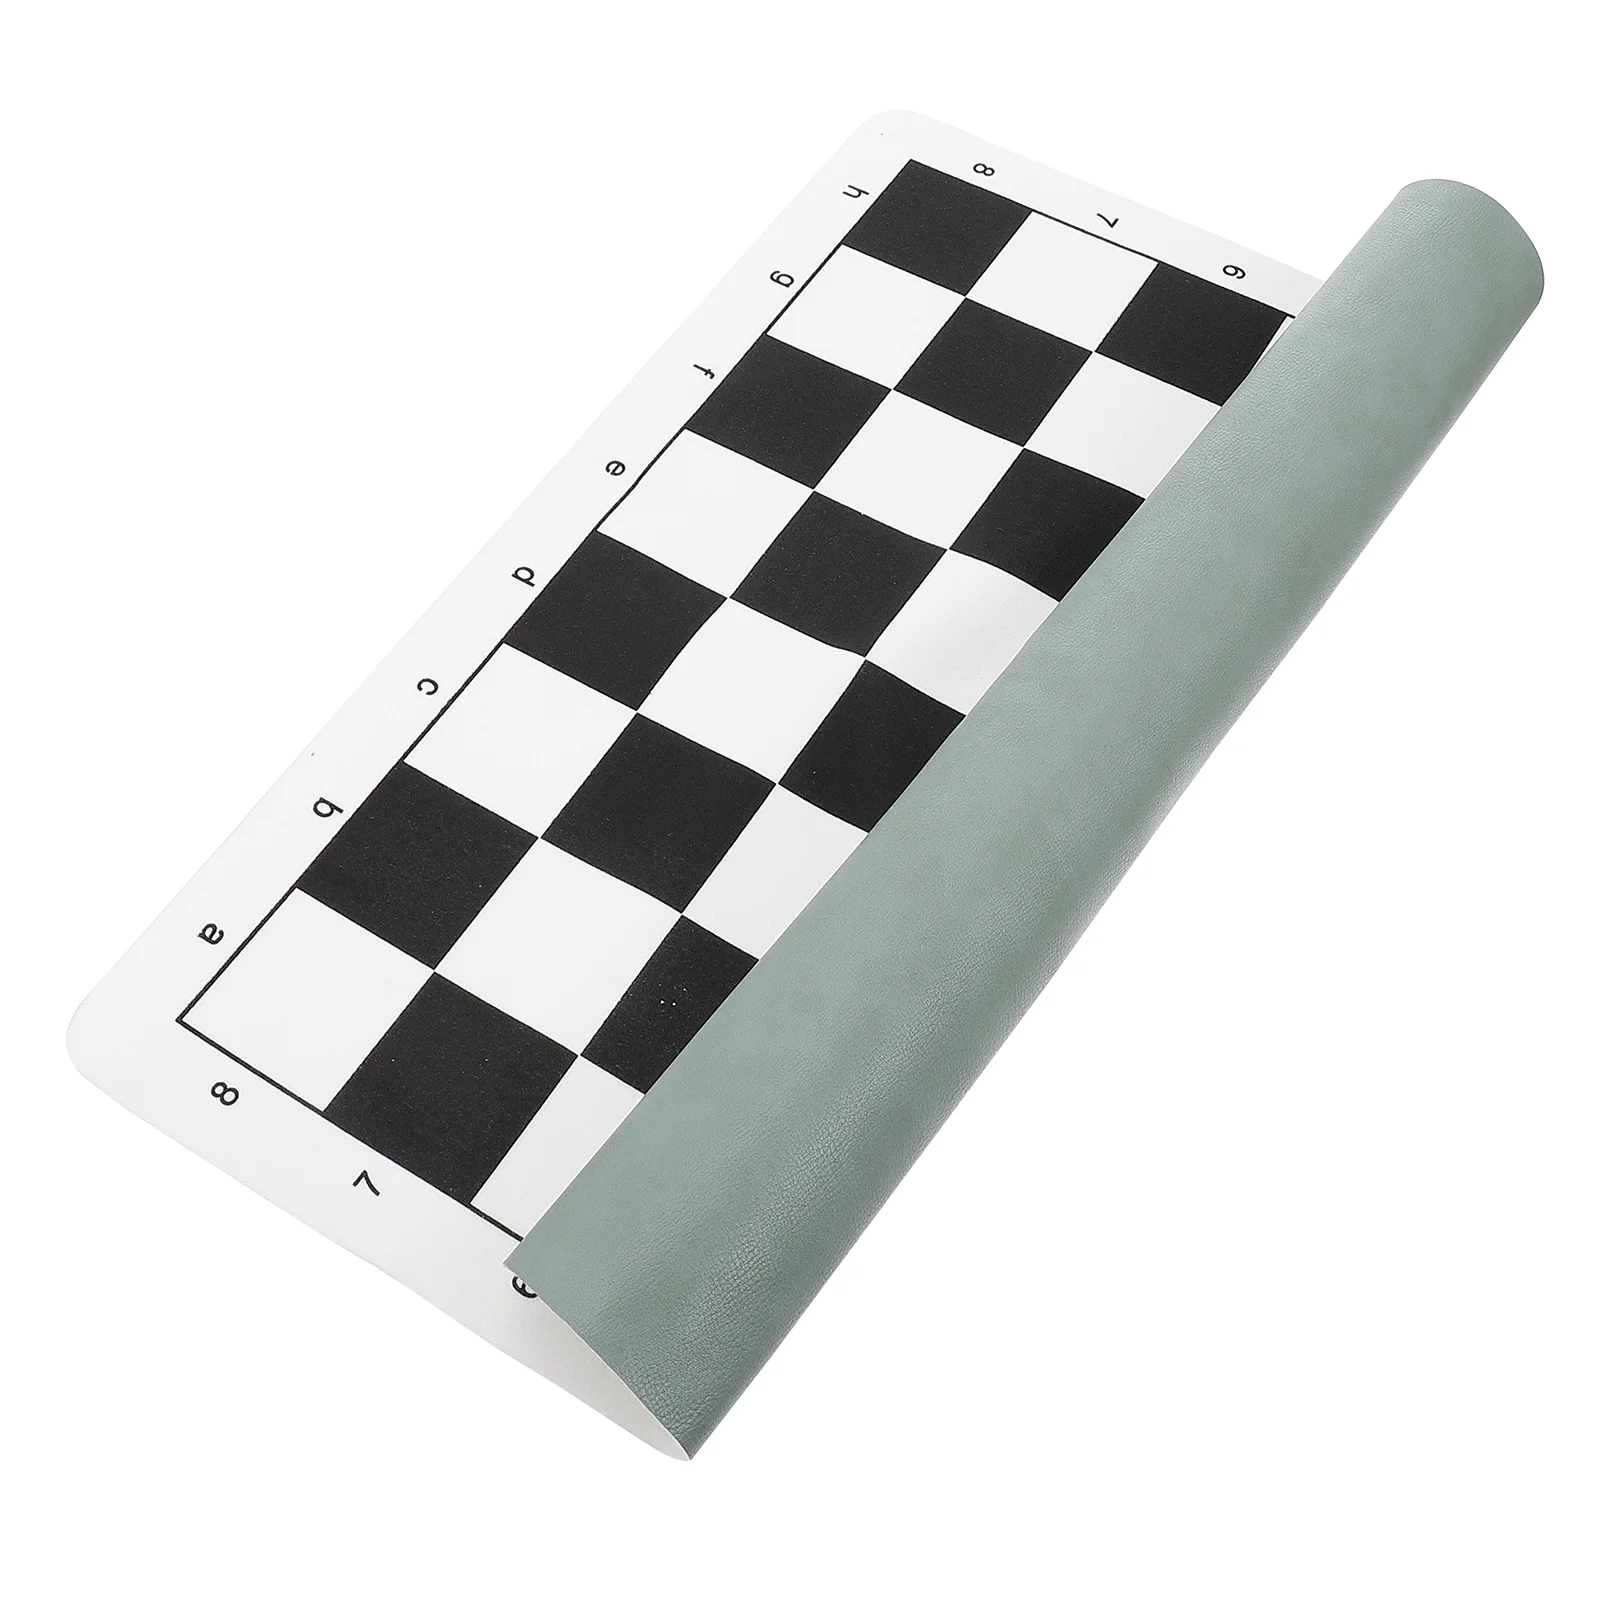 

Chess Board Mat Game Folding International Table Travel Rollprofessional Chinese Chessboard Portable Convenient Foldable Black